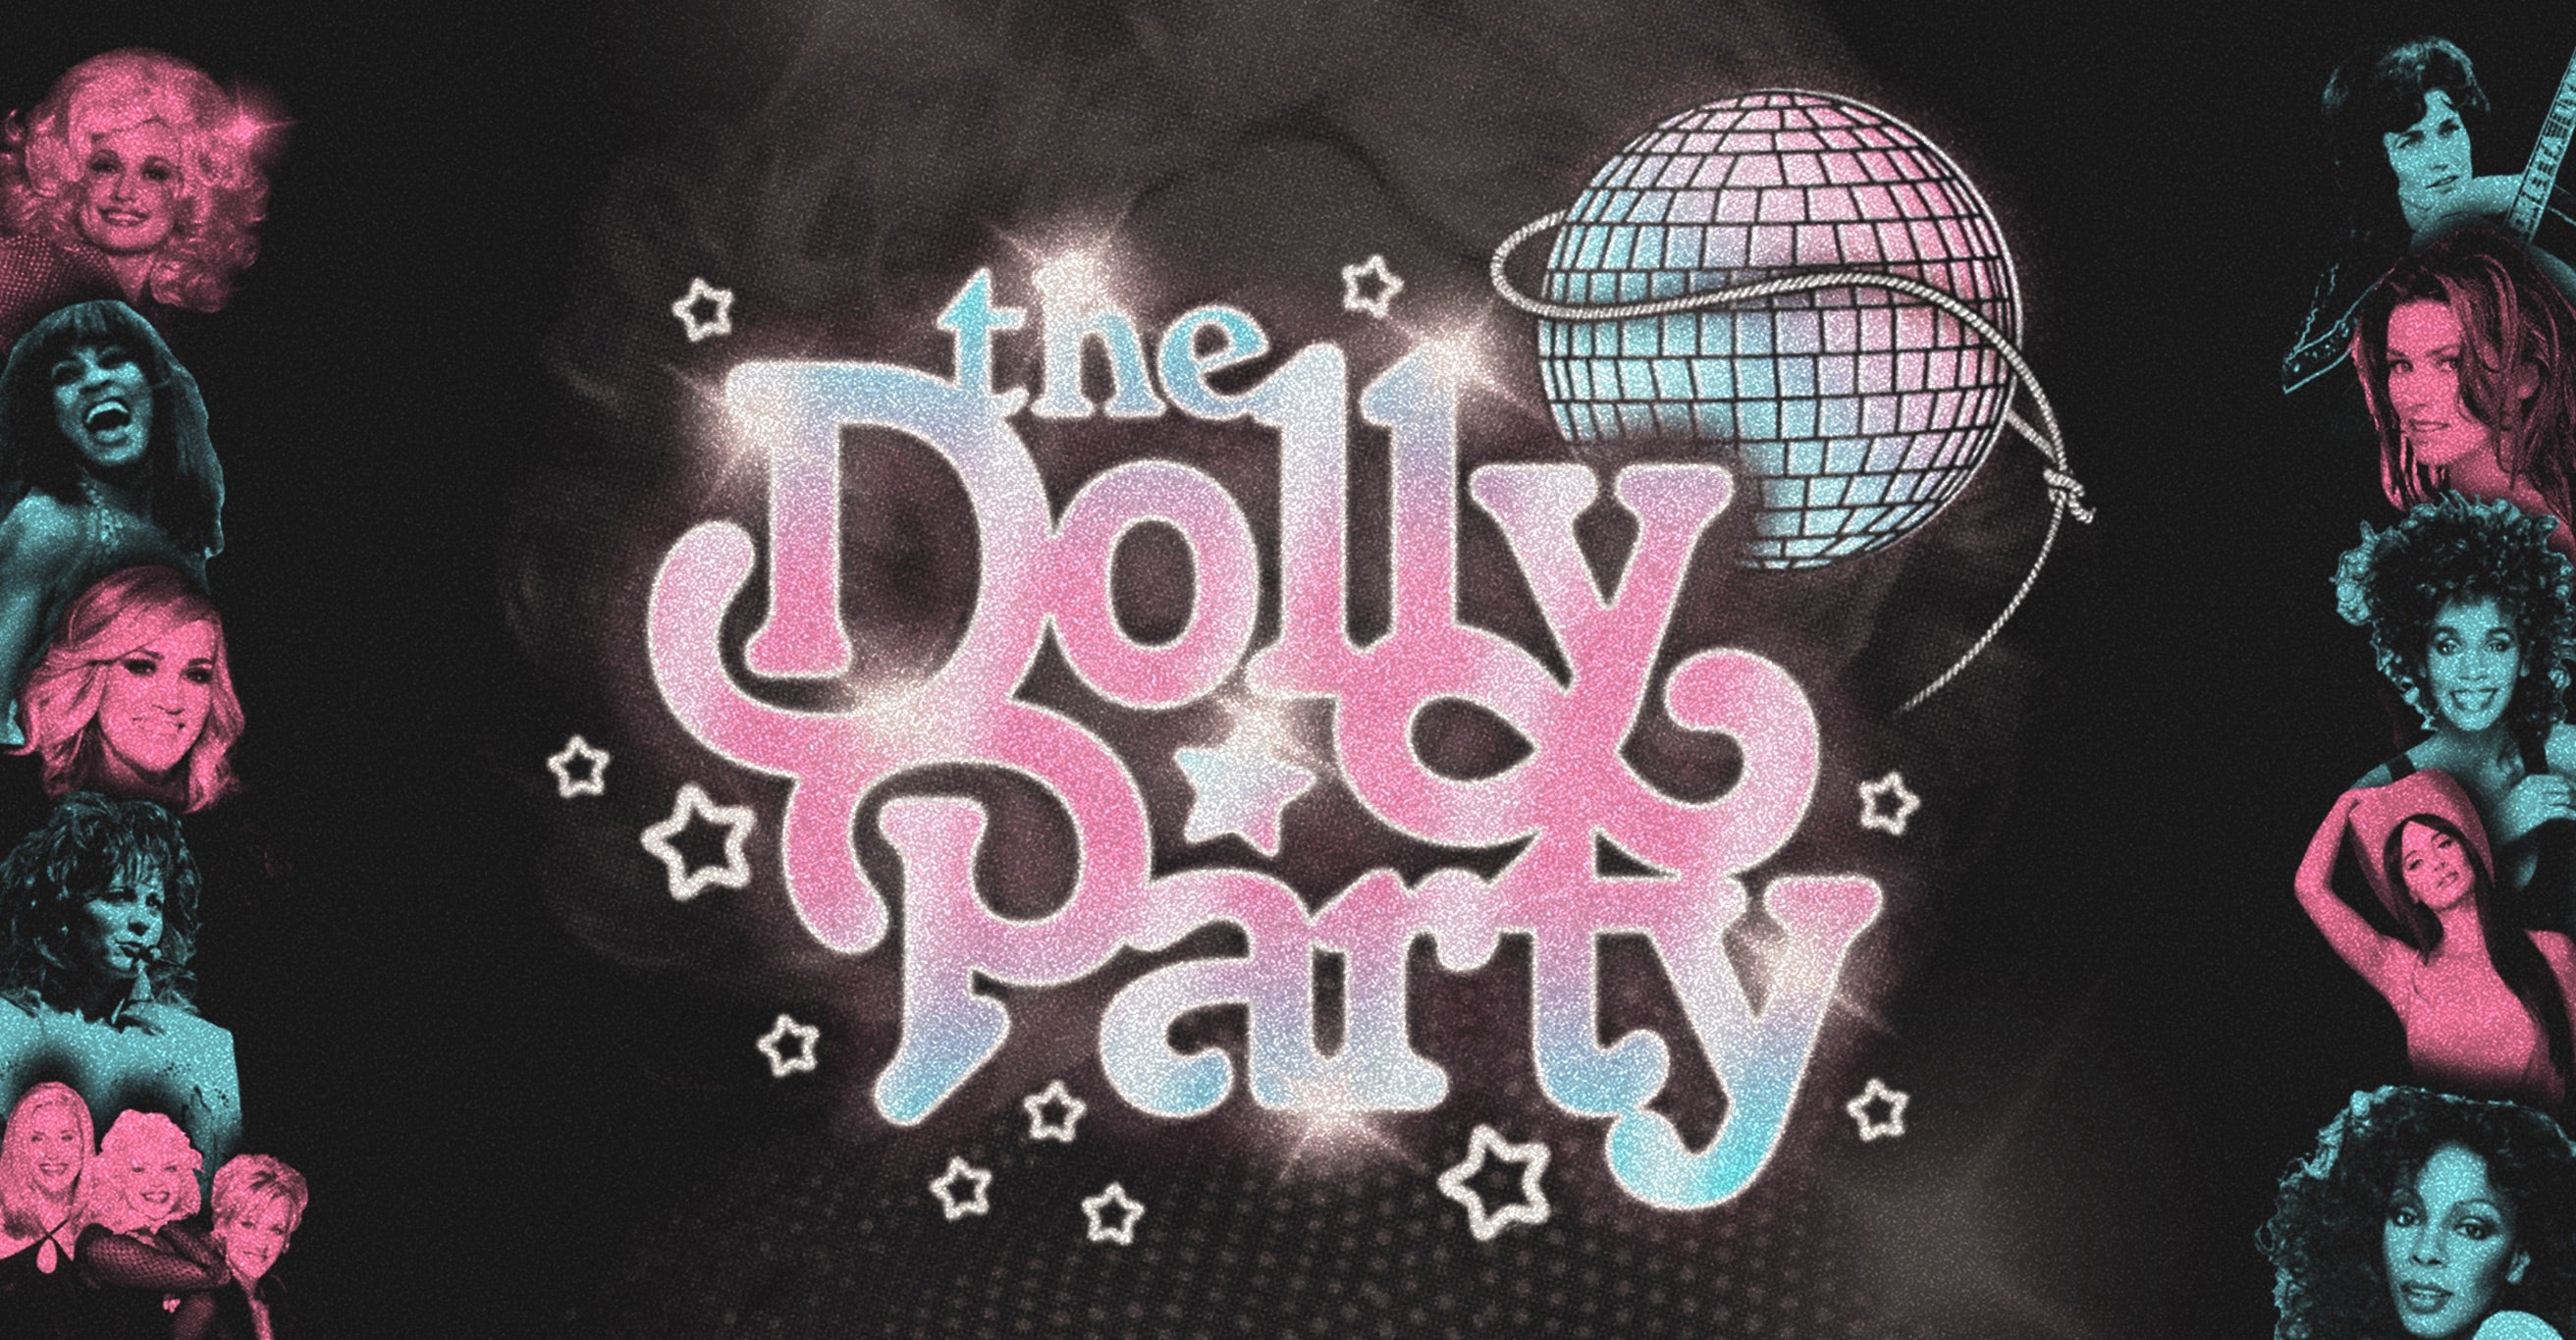 THE DOLLY PARTY: The Dolly Parton Inspired Country Western Diva Dance Party free presale c0de